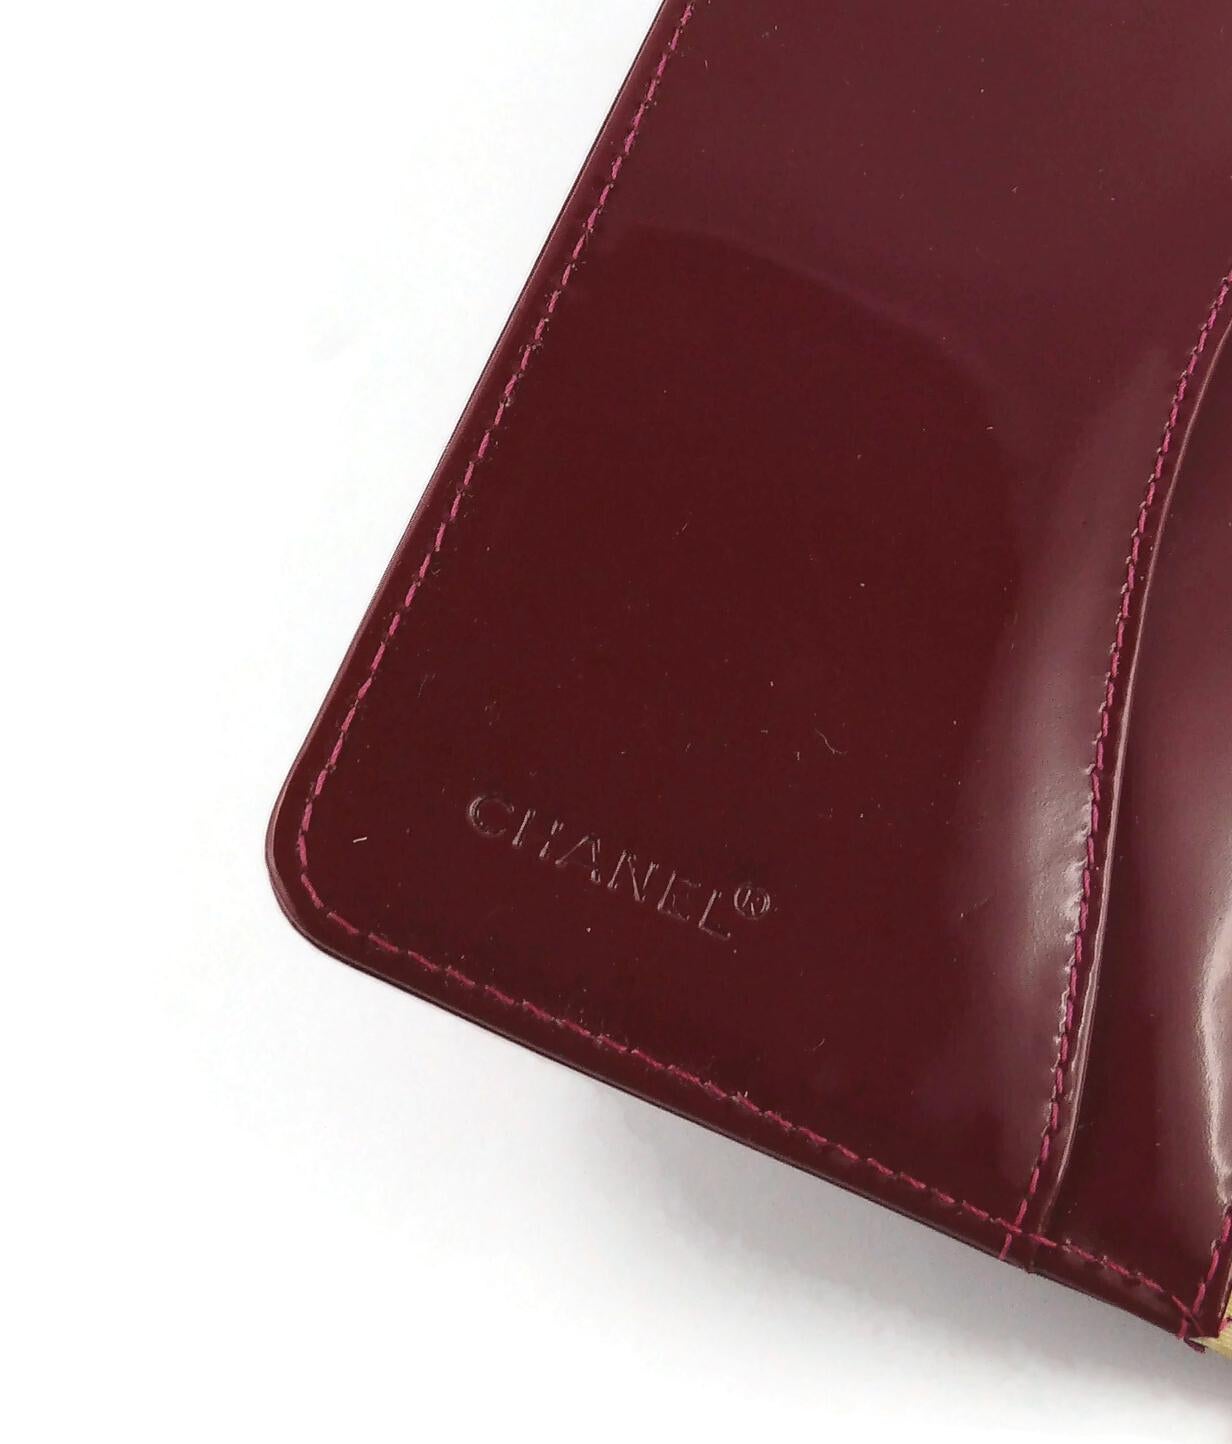 Chanel CC Agenda Day Planner Cover Strawberry Red Patent Leather 3